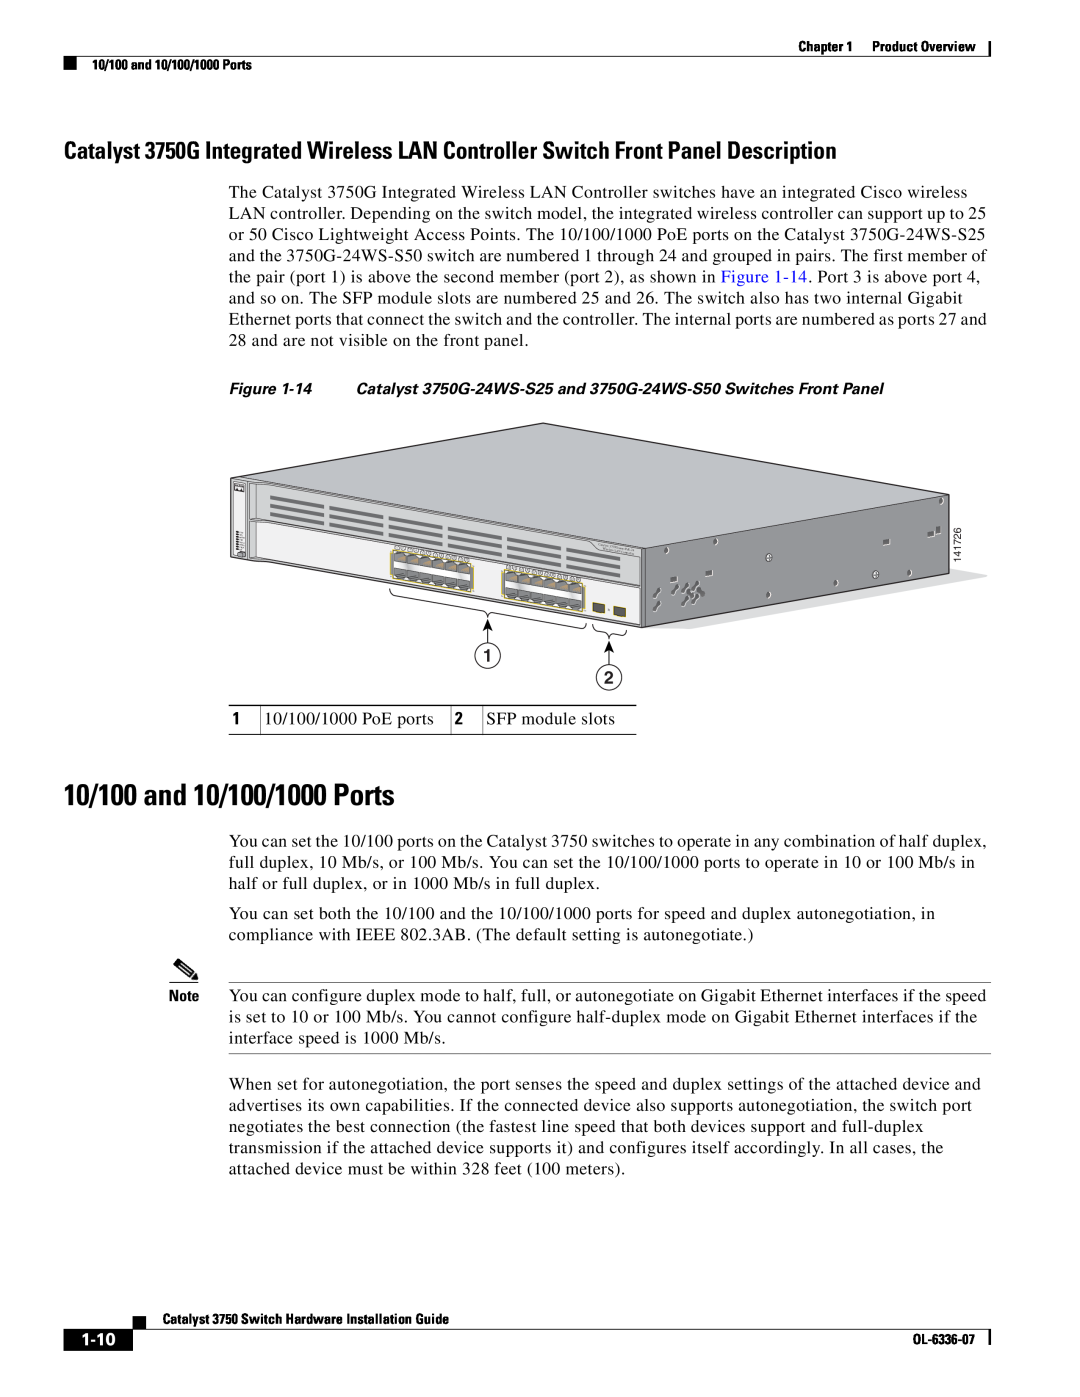 Cisco Systems WSC3750X24TS specifications 10/100 and 10/100/1000 Ports, 1-10, Wireless 